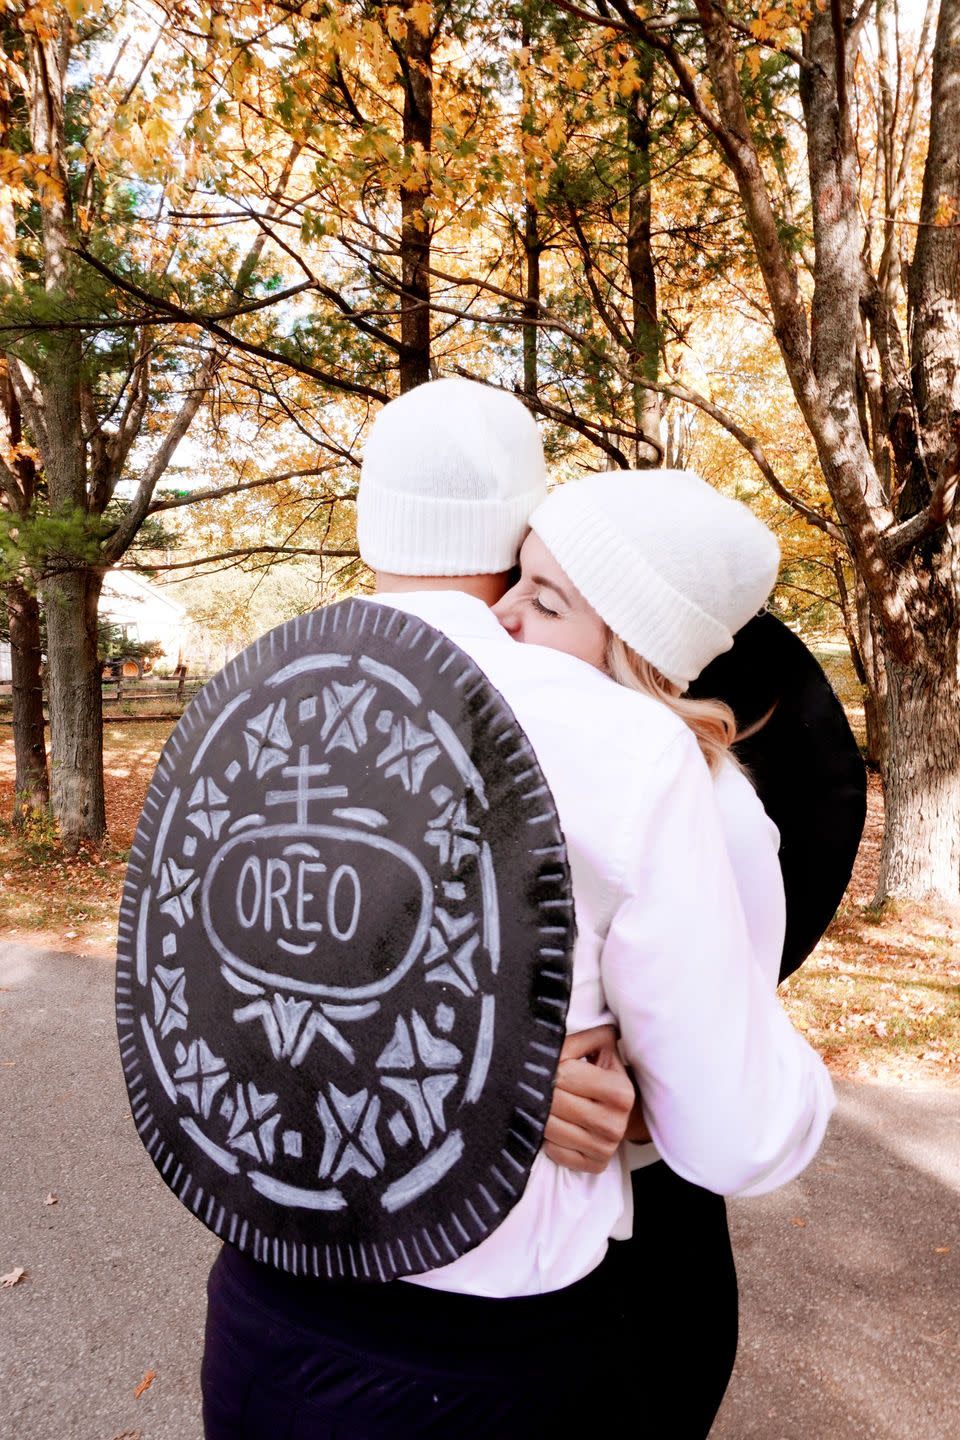 <p>Here’s an excuse to hug all Halloween night—each of you can be one half of an Oreo! The white hats and long-sleeved shirts will keep you warm too. </p><p><strong>Get the tutorial at <a href="https://www.legalleeblonde.com/2019/10/diy-halloween-costume-ideas-for-couples.html" rel="nofollow noopener" target="_blank" data-ylk="slk:LegalLee Blonde" class="link ">LegalLee Blonde</a>.</strong> </p>